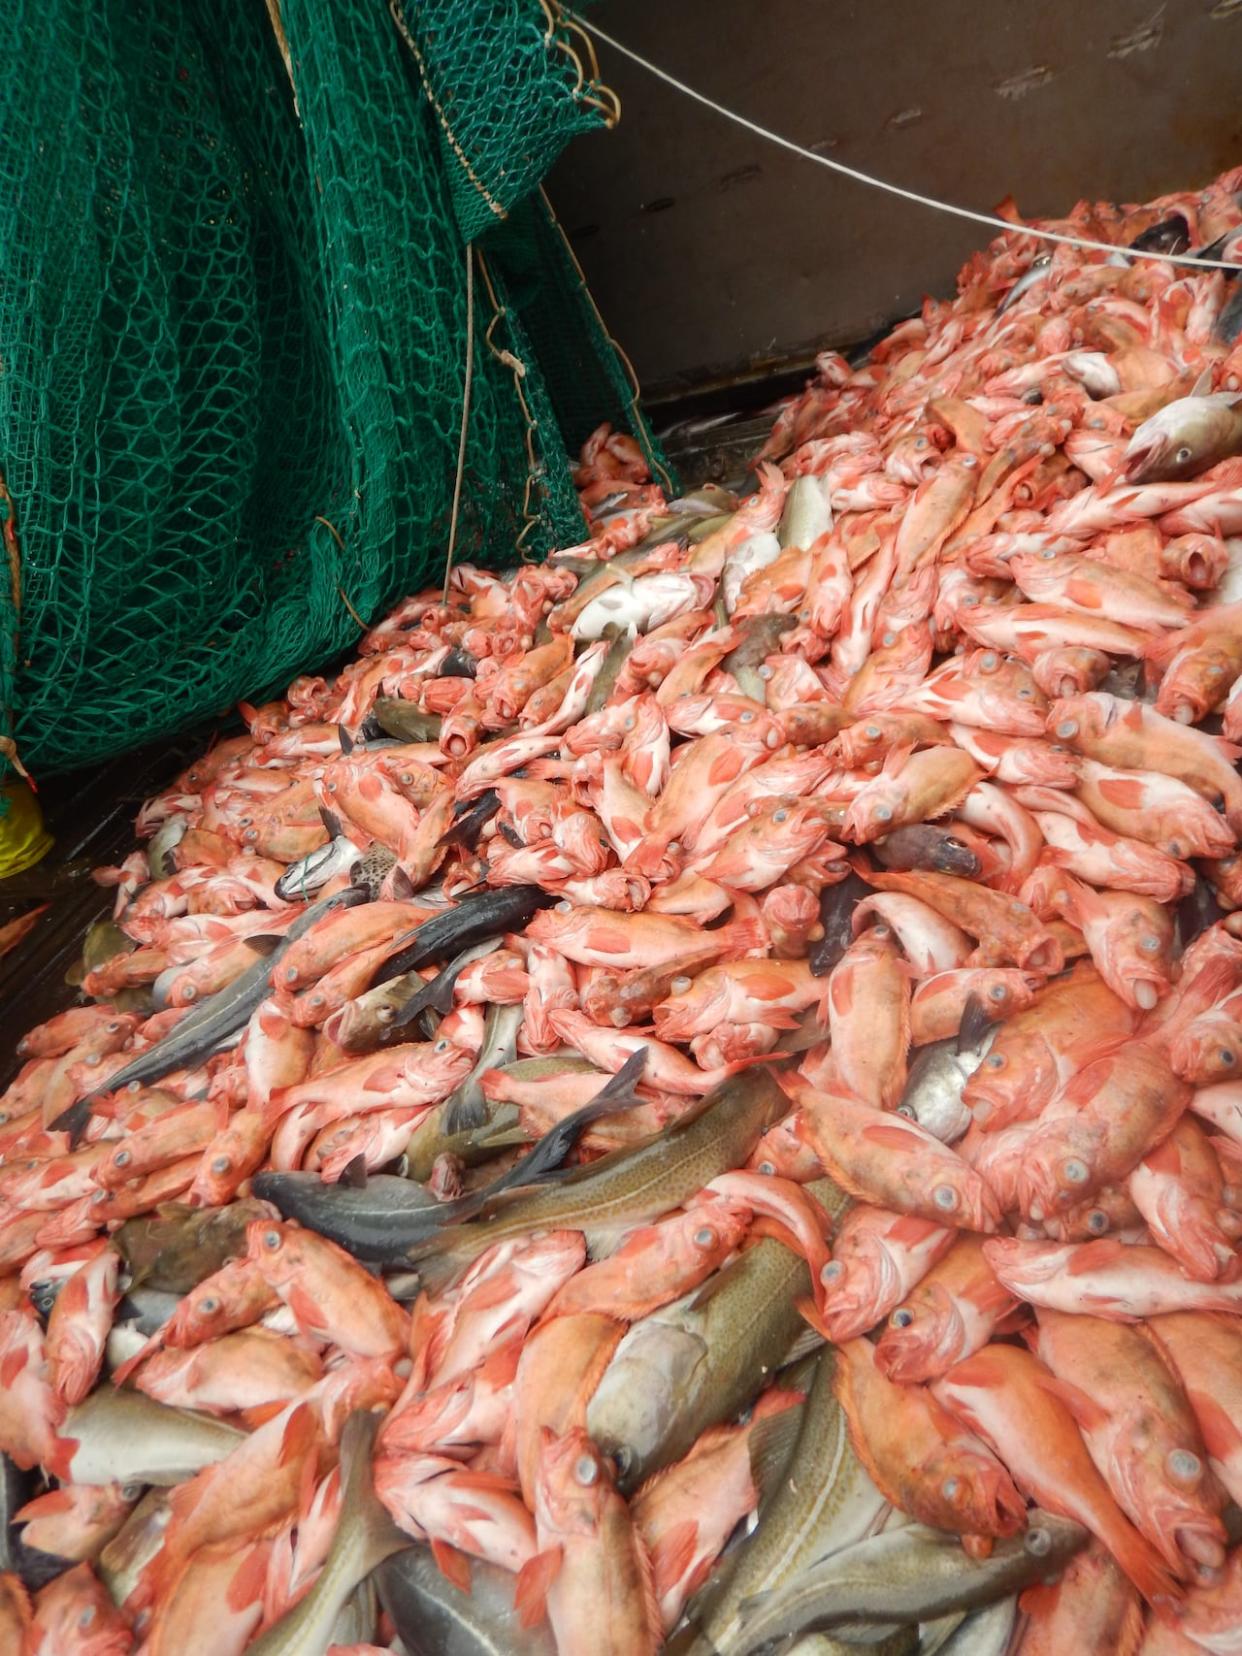 Nova Scotia Fisheries and Aquaculture Minister Kent Smith is hoping the province maintains its historic share of the fishery. (Submitted by Marine Institute - image credit)